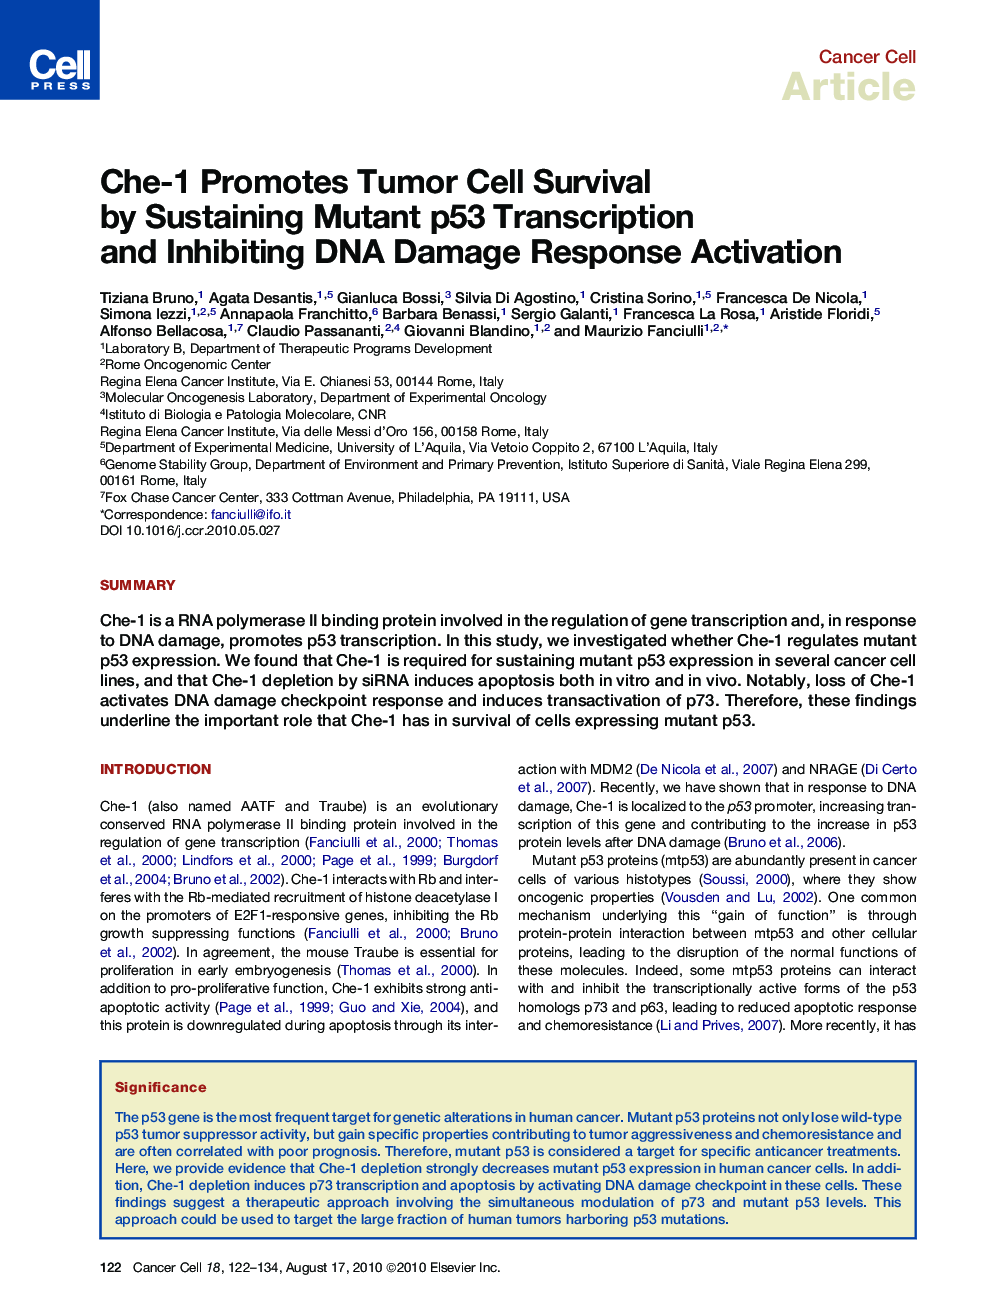 Che-1 Promotes Tumor Cell Survival by Sustaining Mutant p53 Transcription and Inhibiting DNA Damage Response Activation